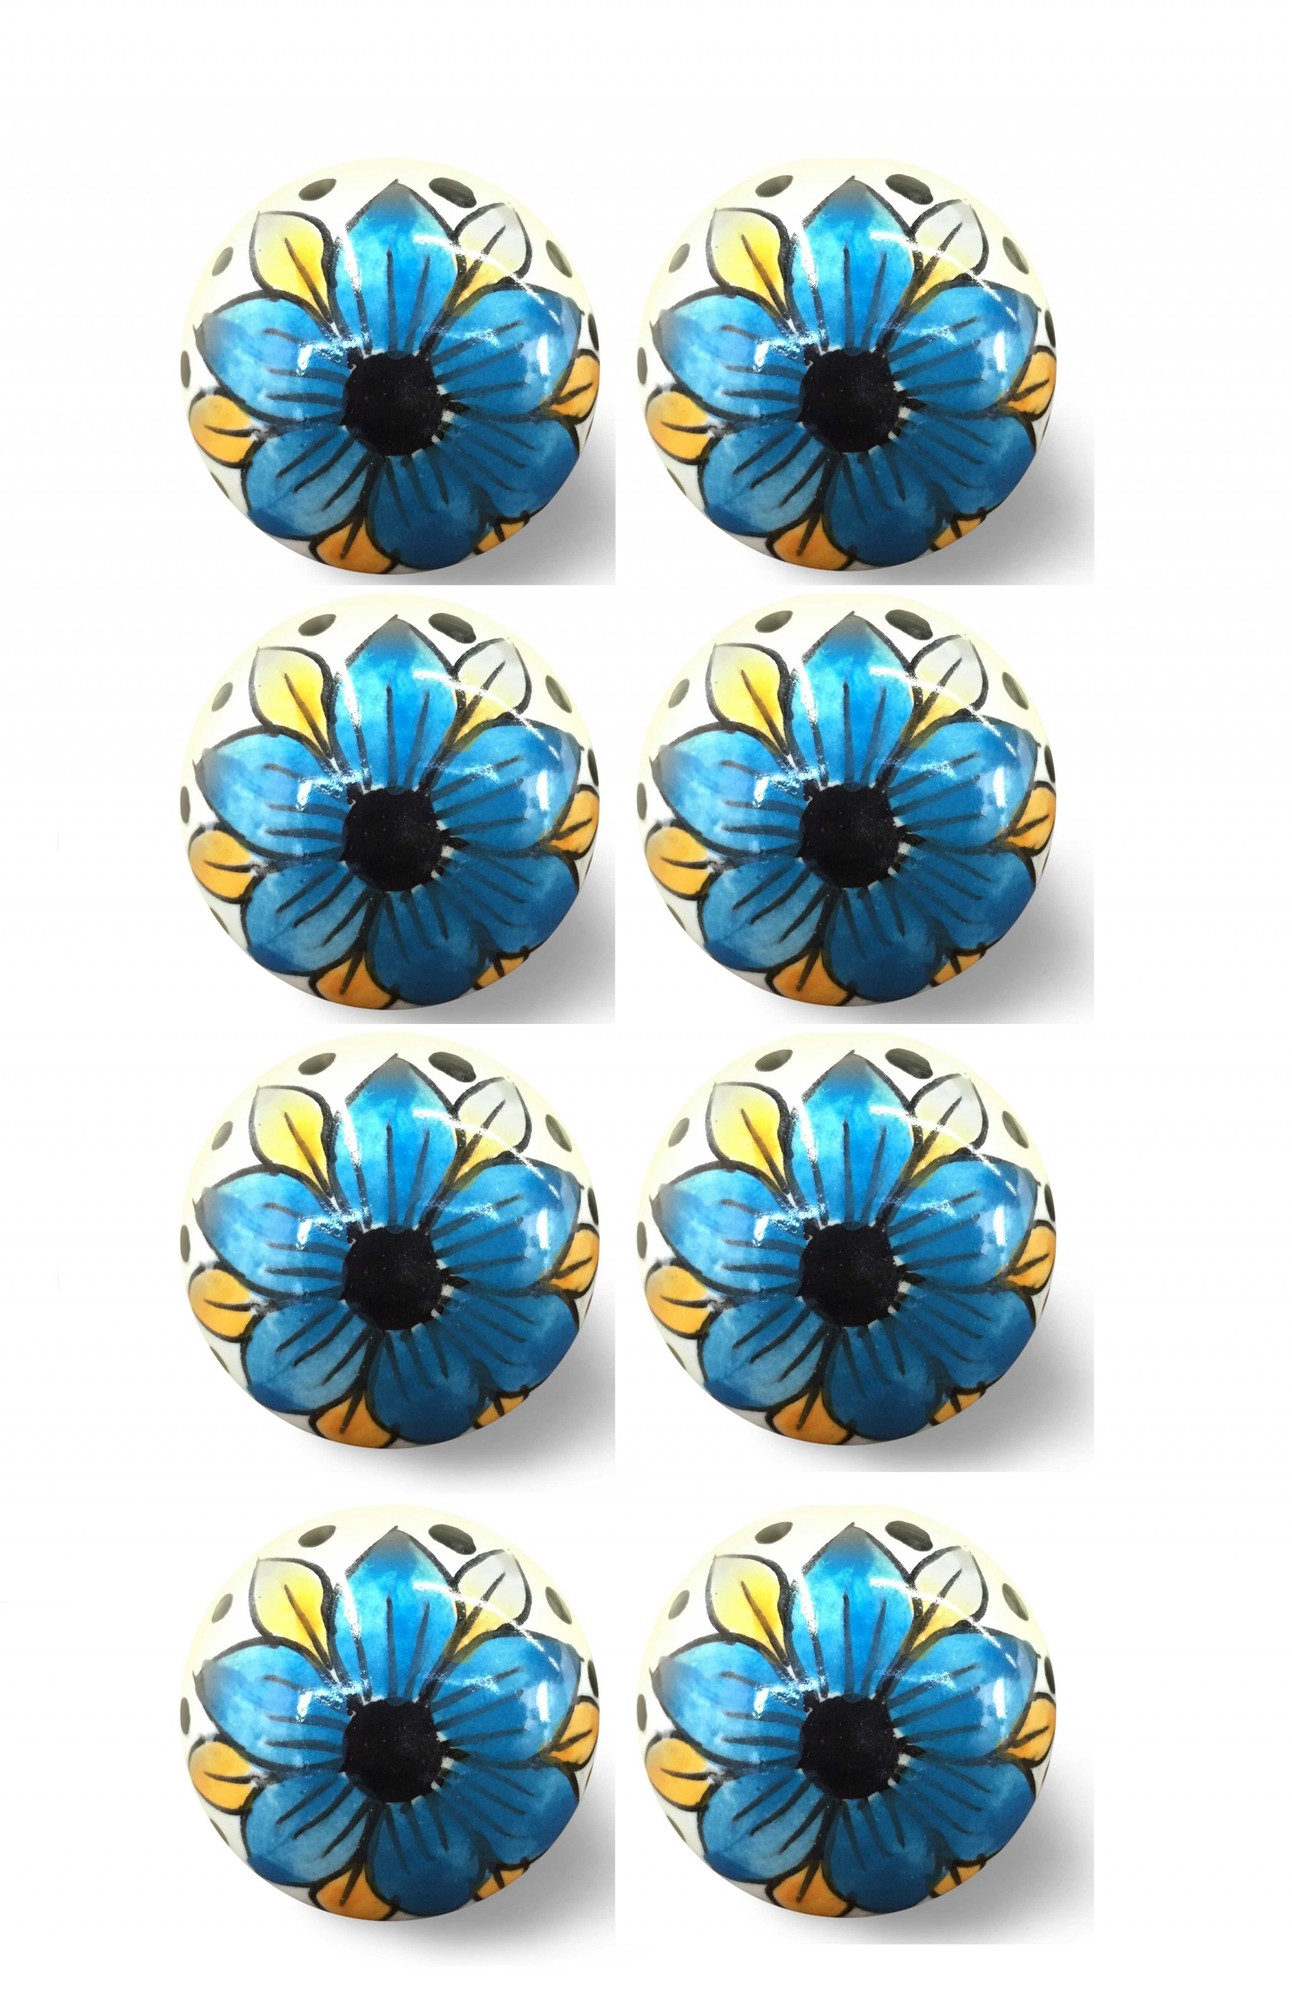 1.5" x 1.5" x 1.5" Blue, Black And Yellow - Knobs 8-Pack